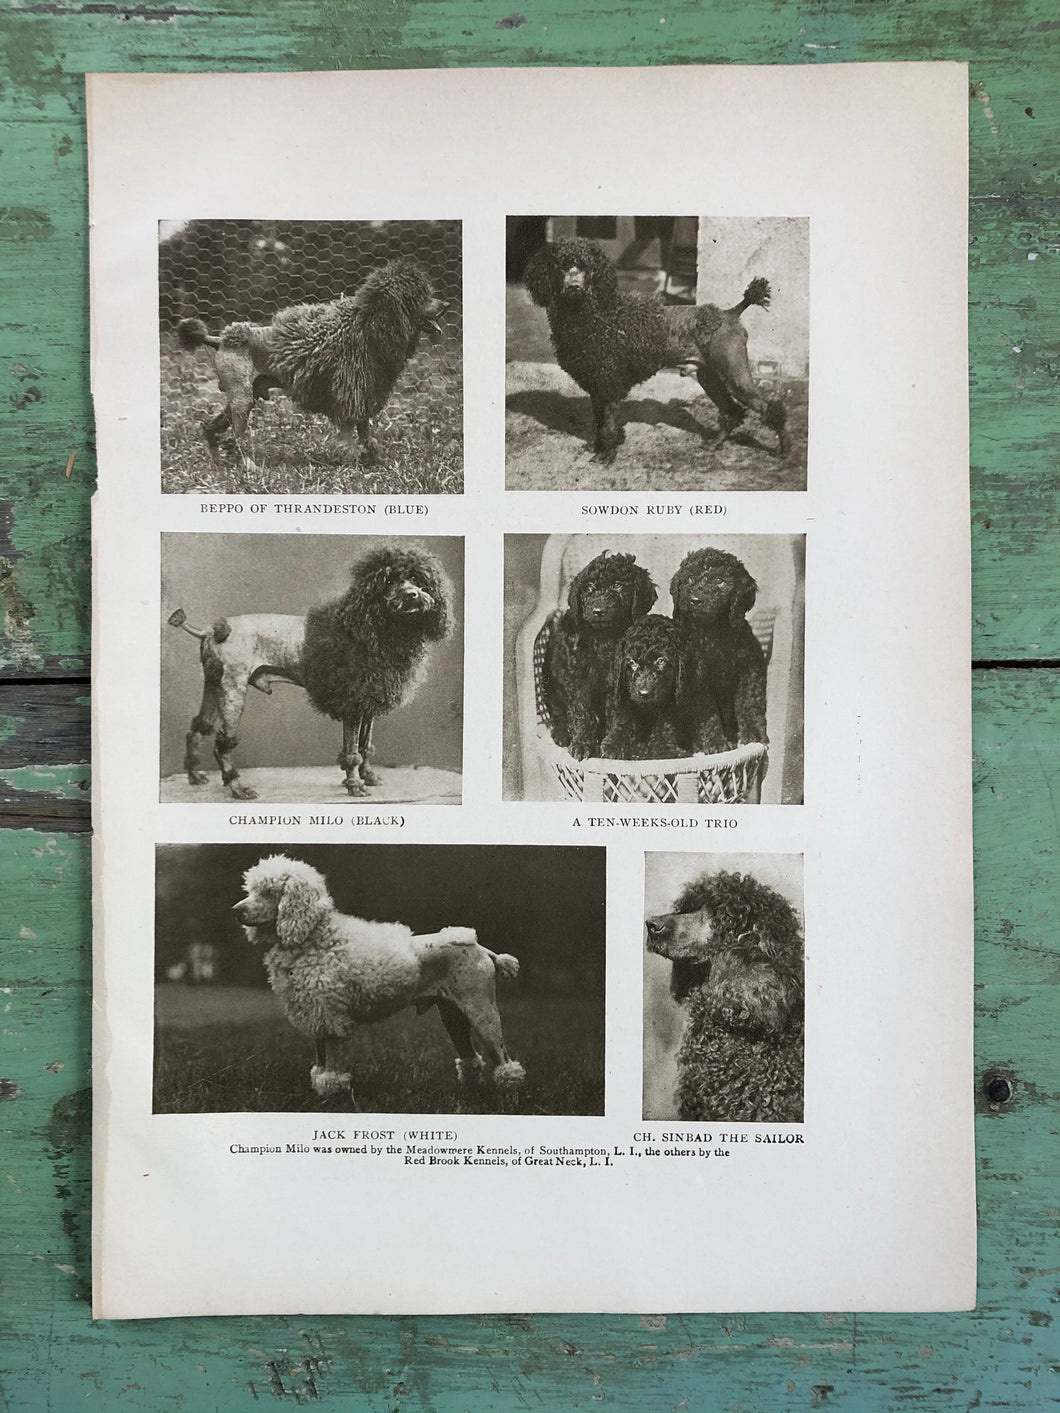 Poodle Print from “The Dog Book” by James Watson